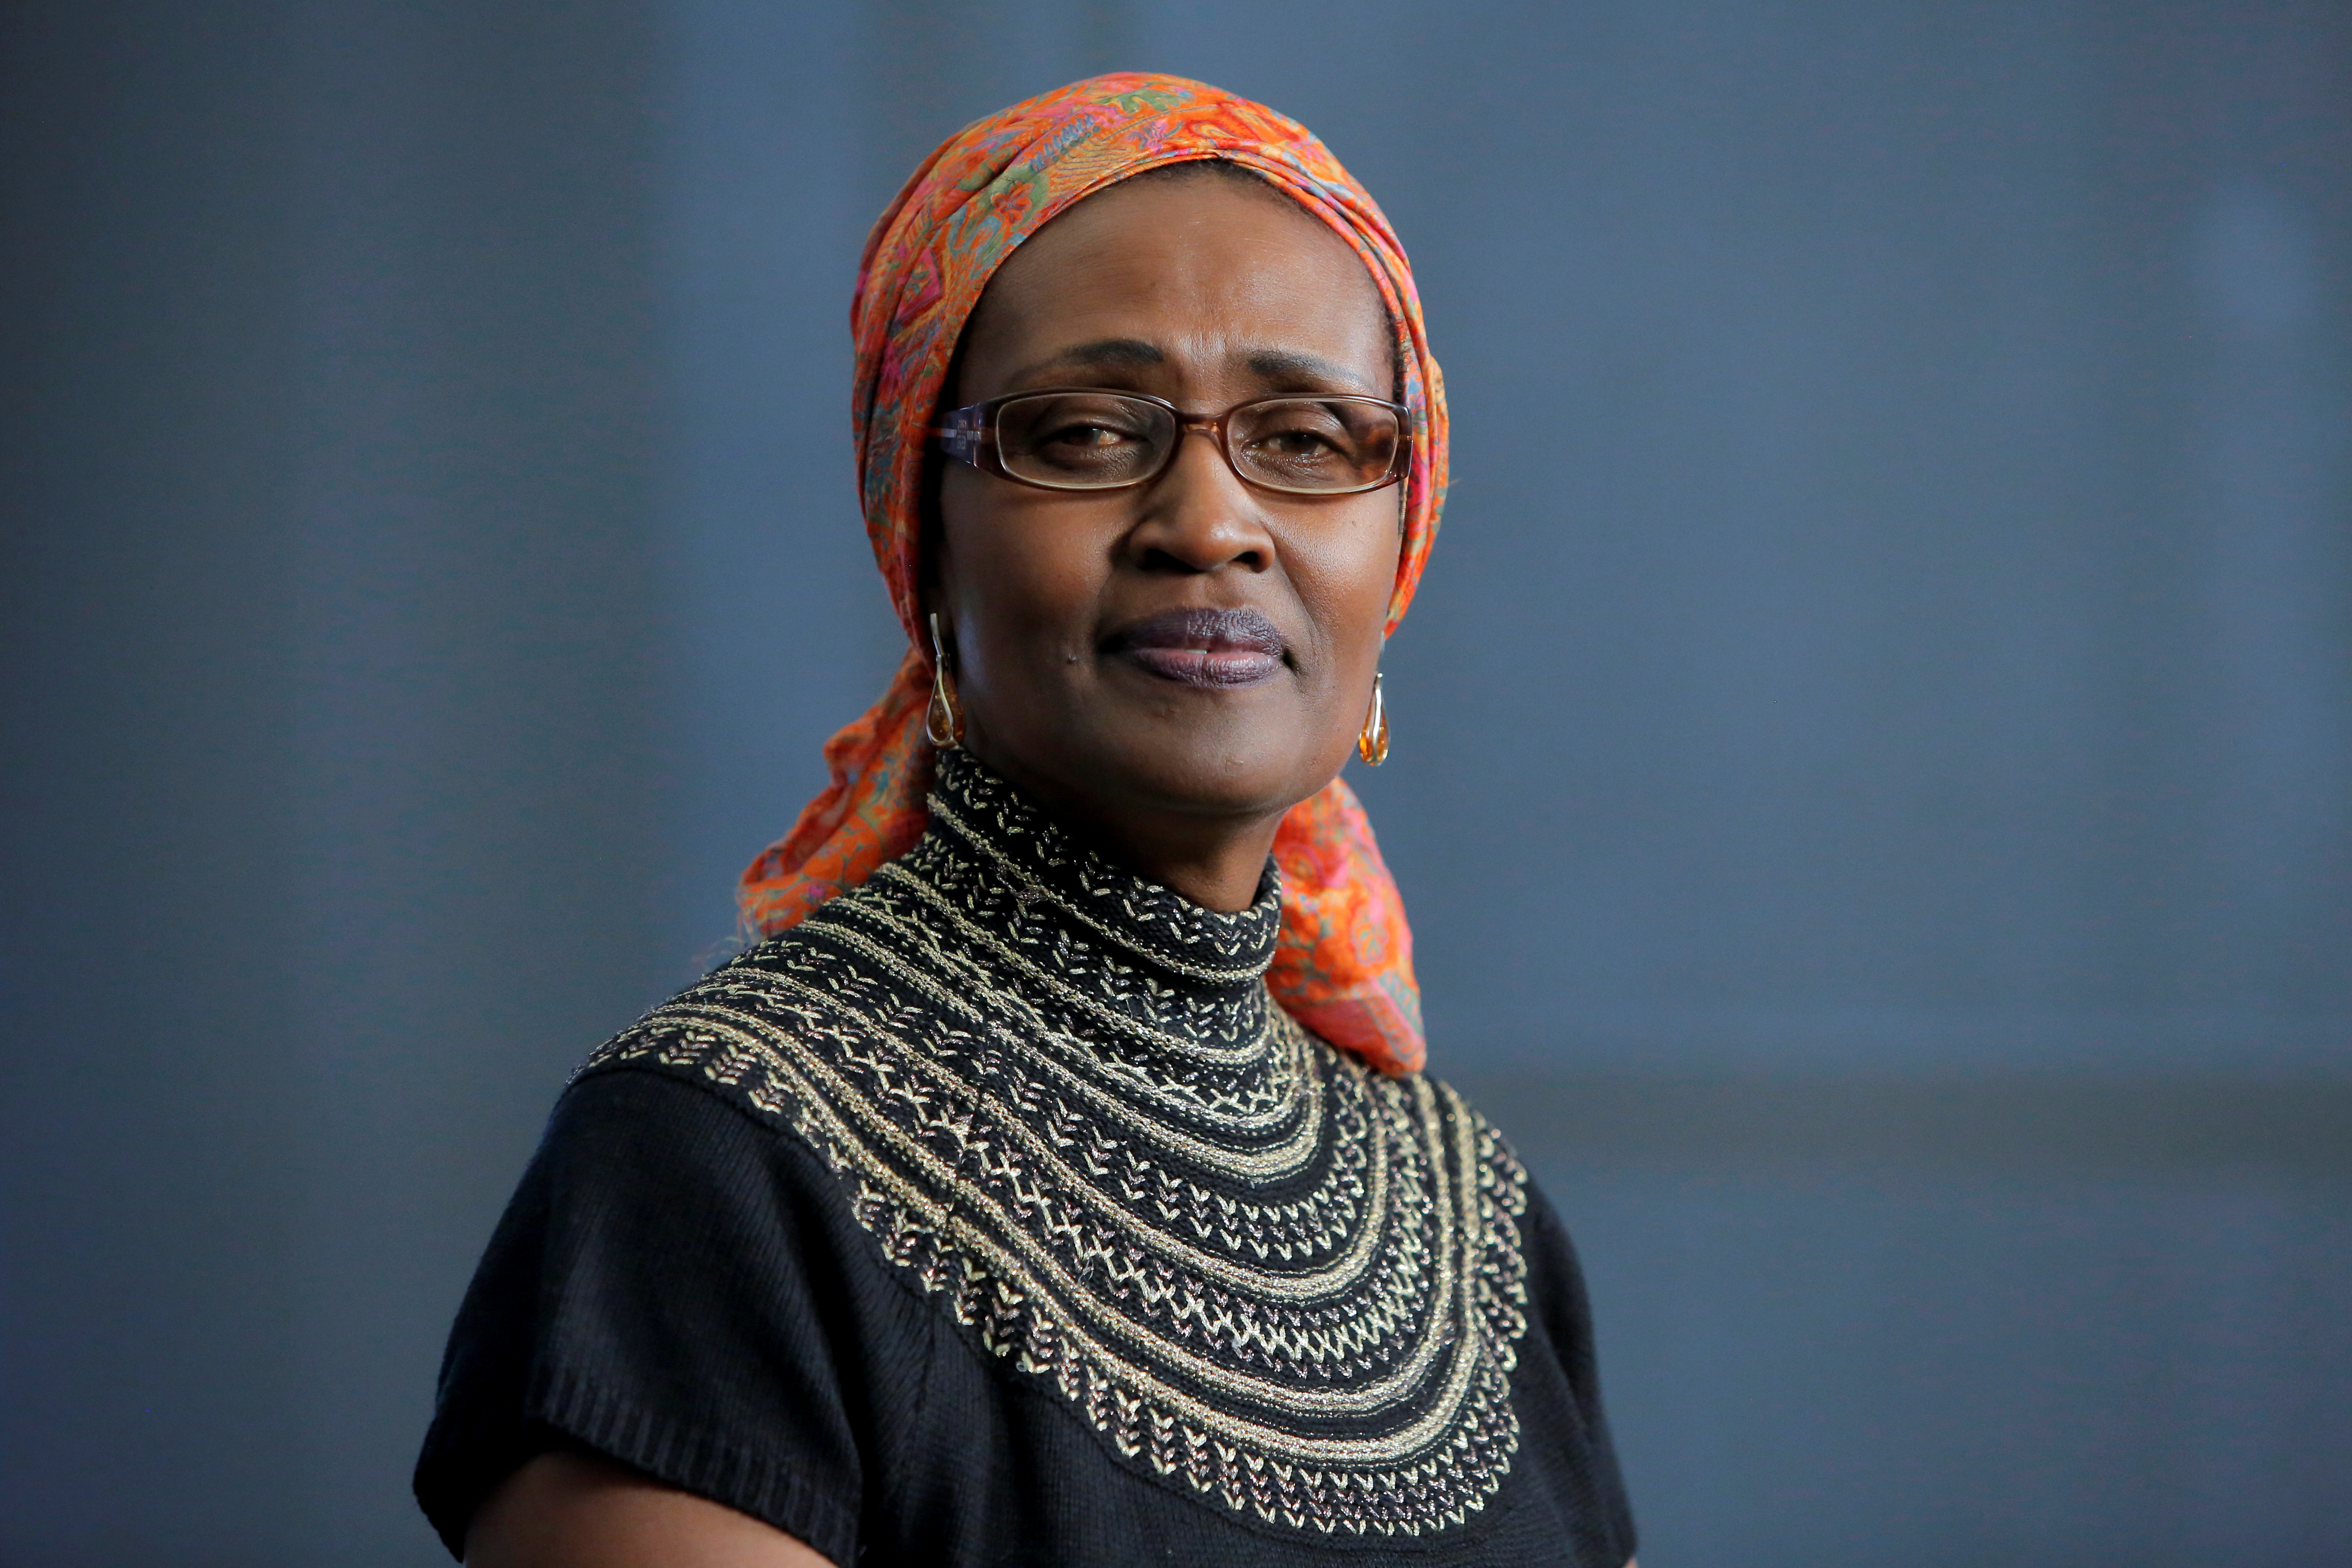     UNAIDS Executive Director Winnie Byanyima poses for a portrait after an interview in New York, NY, US, Feb. 11, 2018. REUTERS/Andrew Kelly